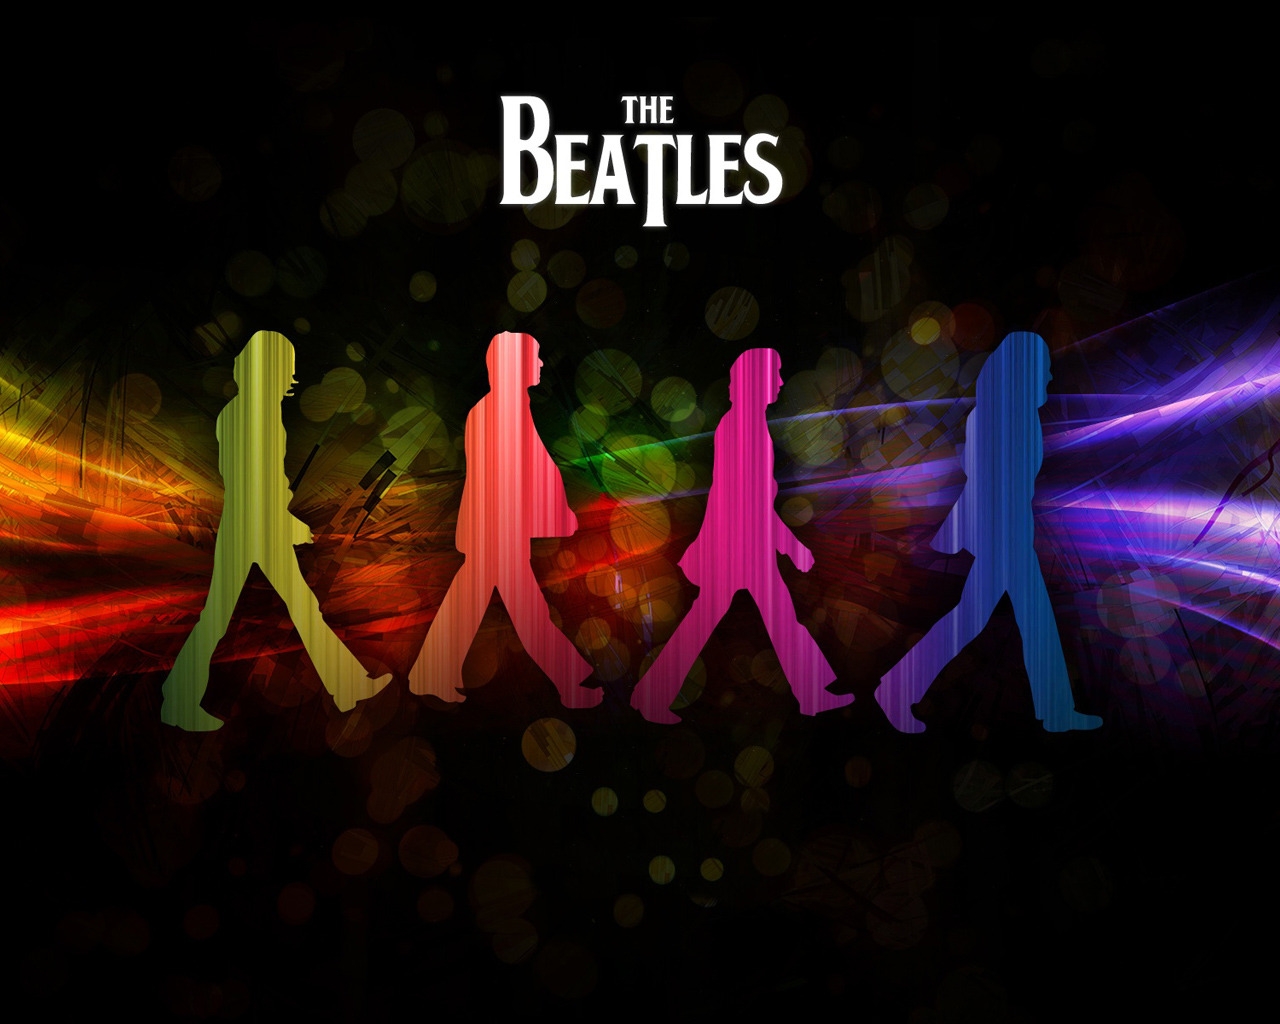 The Beatles Shadows for 1280 x 1024 resolution